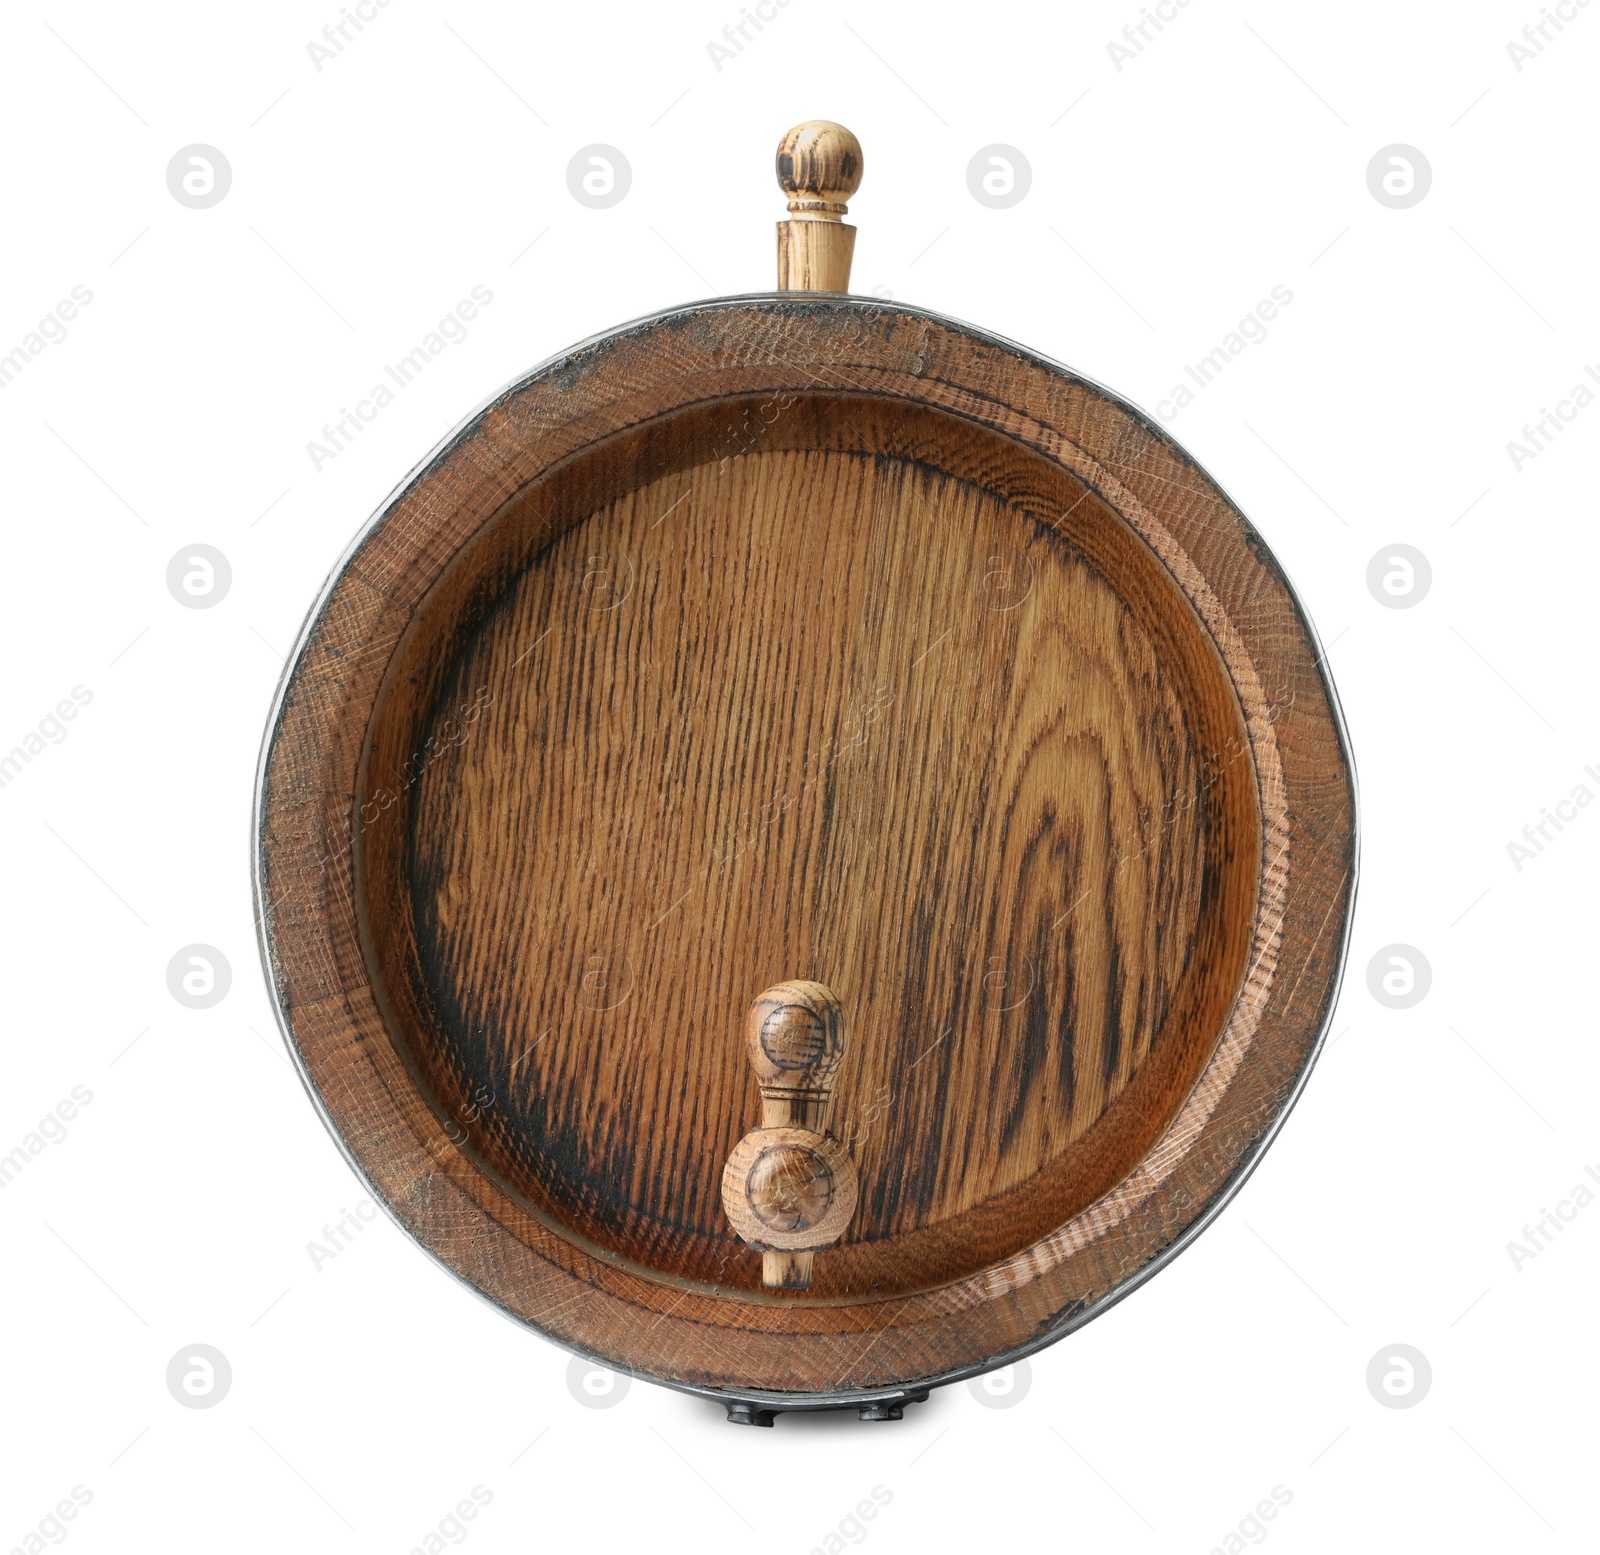 Photo of One wooden with tap barrel isolated on white